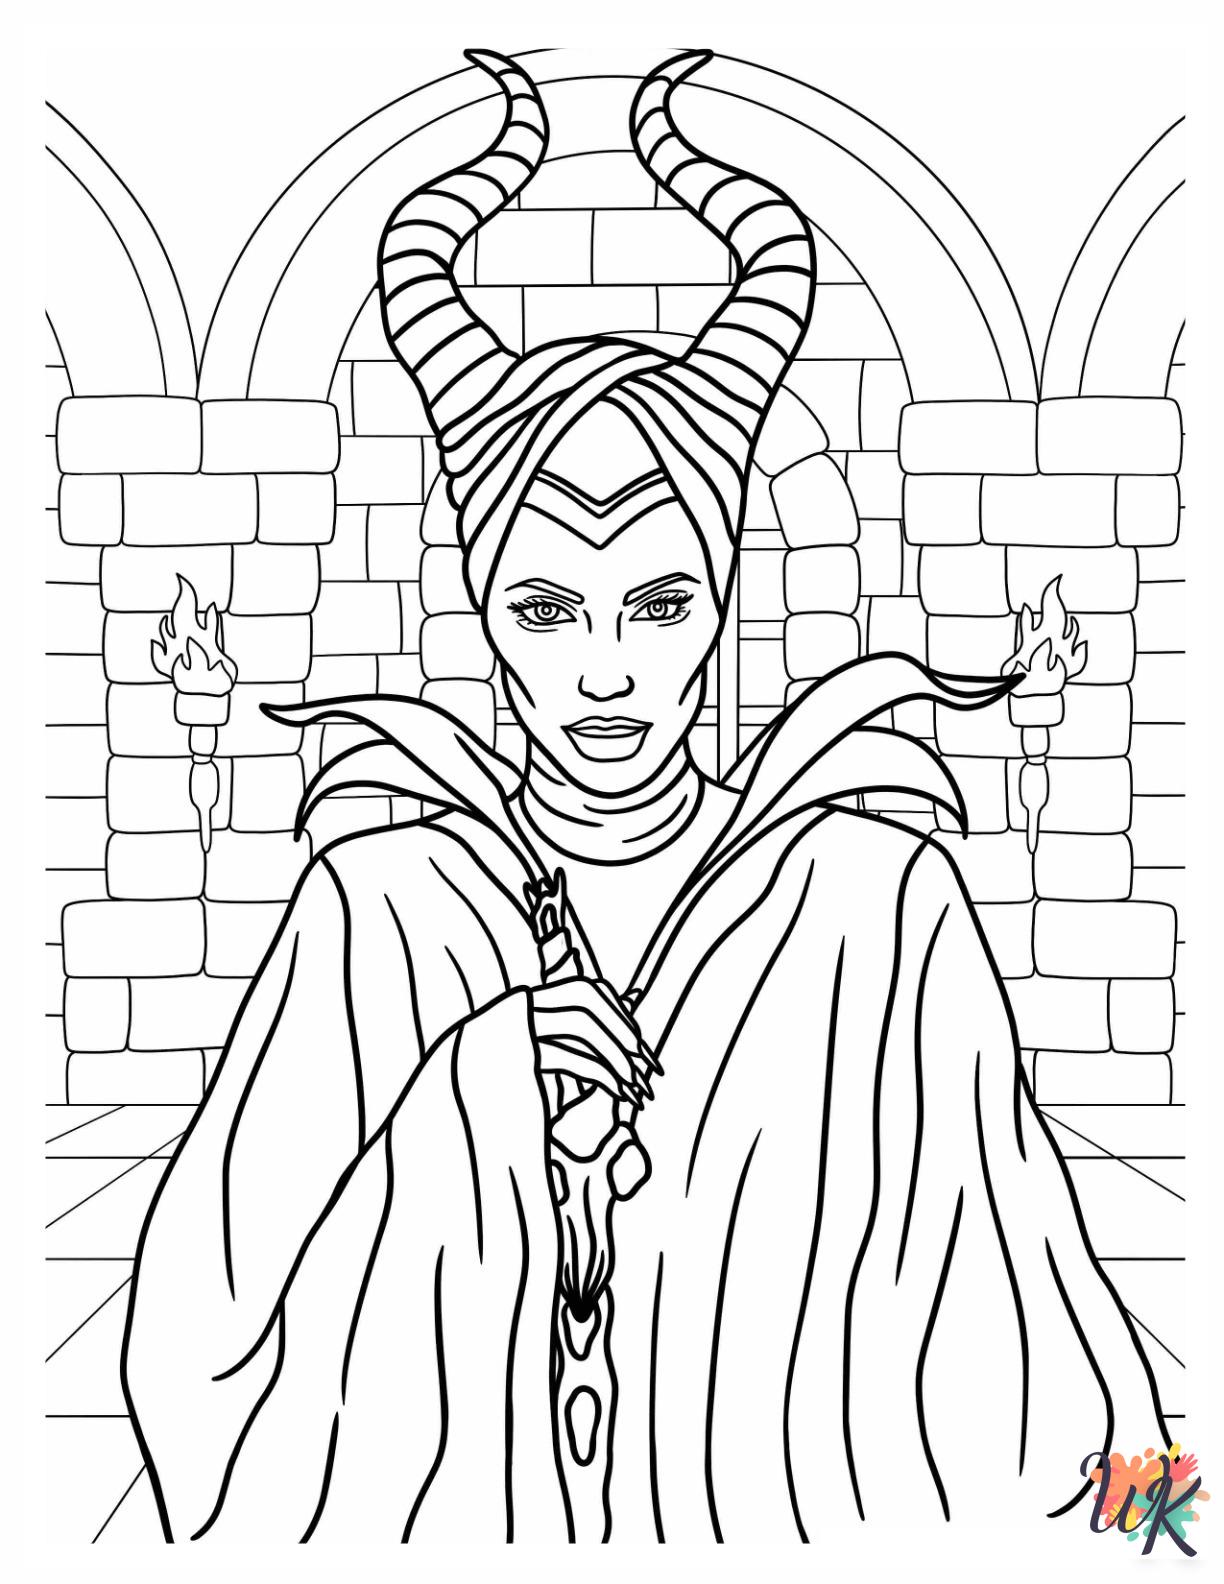 Maleficent coloring pages for preschoolers